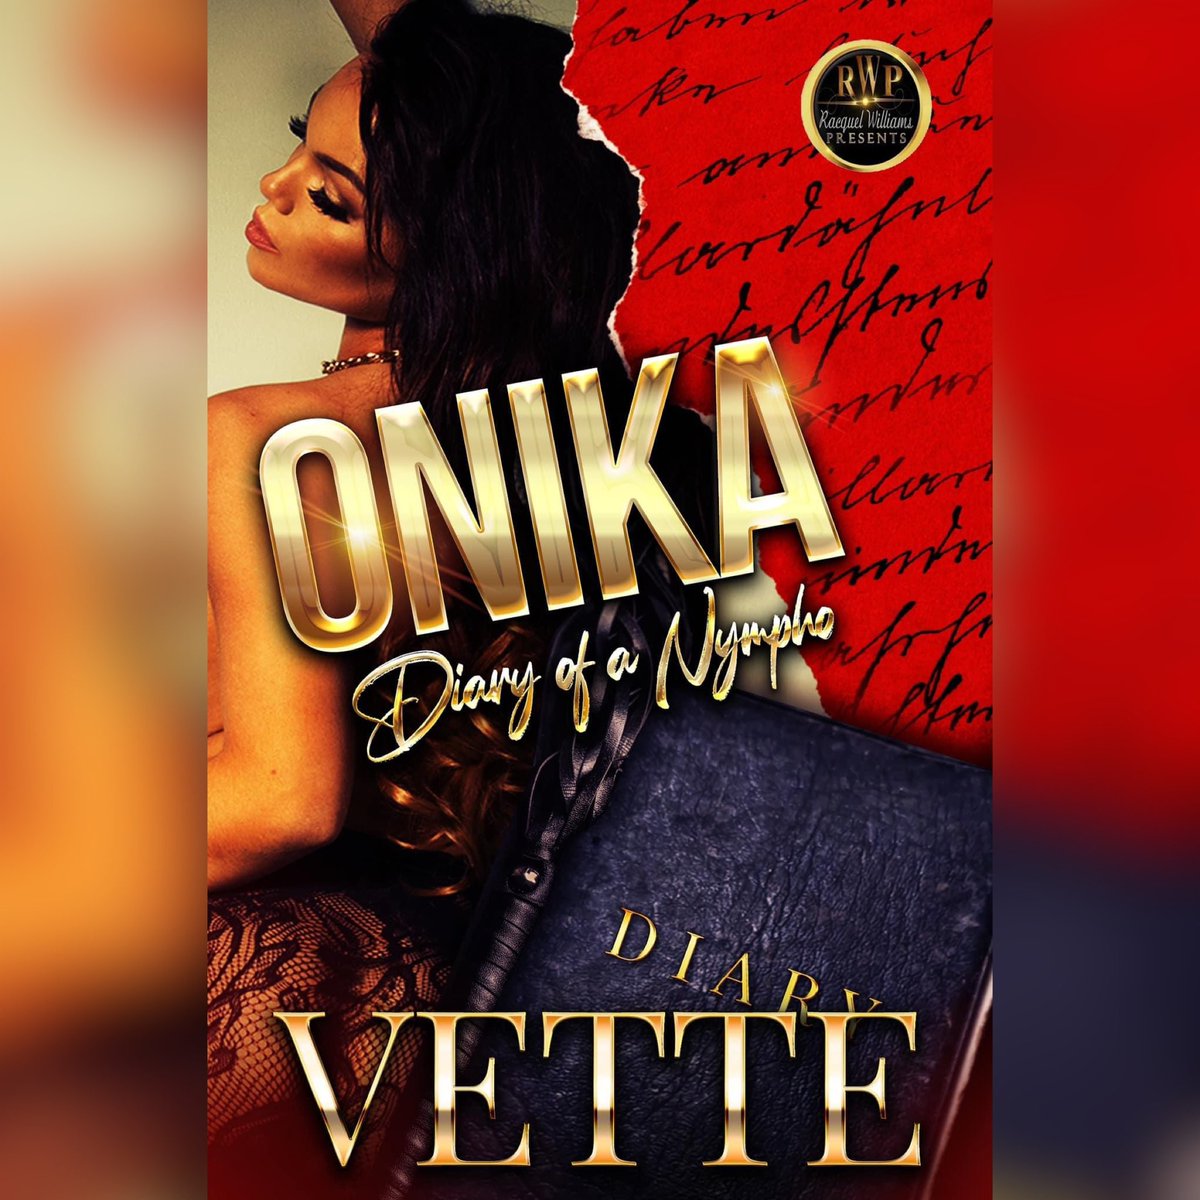 Get Ready! Because my 39th Novel will be dropping on February 4, 2023

Racquel Williams Presents LLC

💦❤️ONIKA: DIARY OF A NYMPHO💦❤️

**SYNOPSIS**

#EroticaQueen #VetteWilson #RacquelWilliamsPresents #UrbanErotica #KindleUnlimited @EroticaFiction #eroticthriller